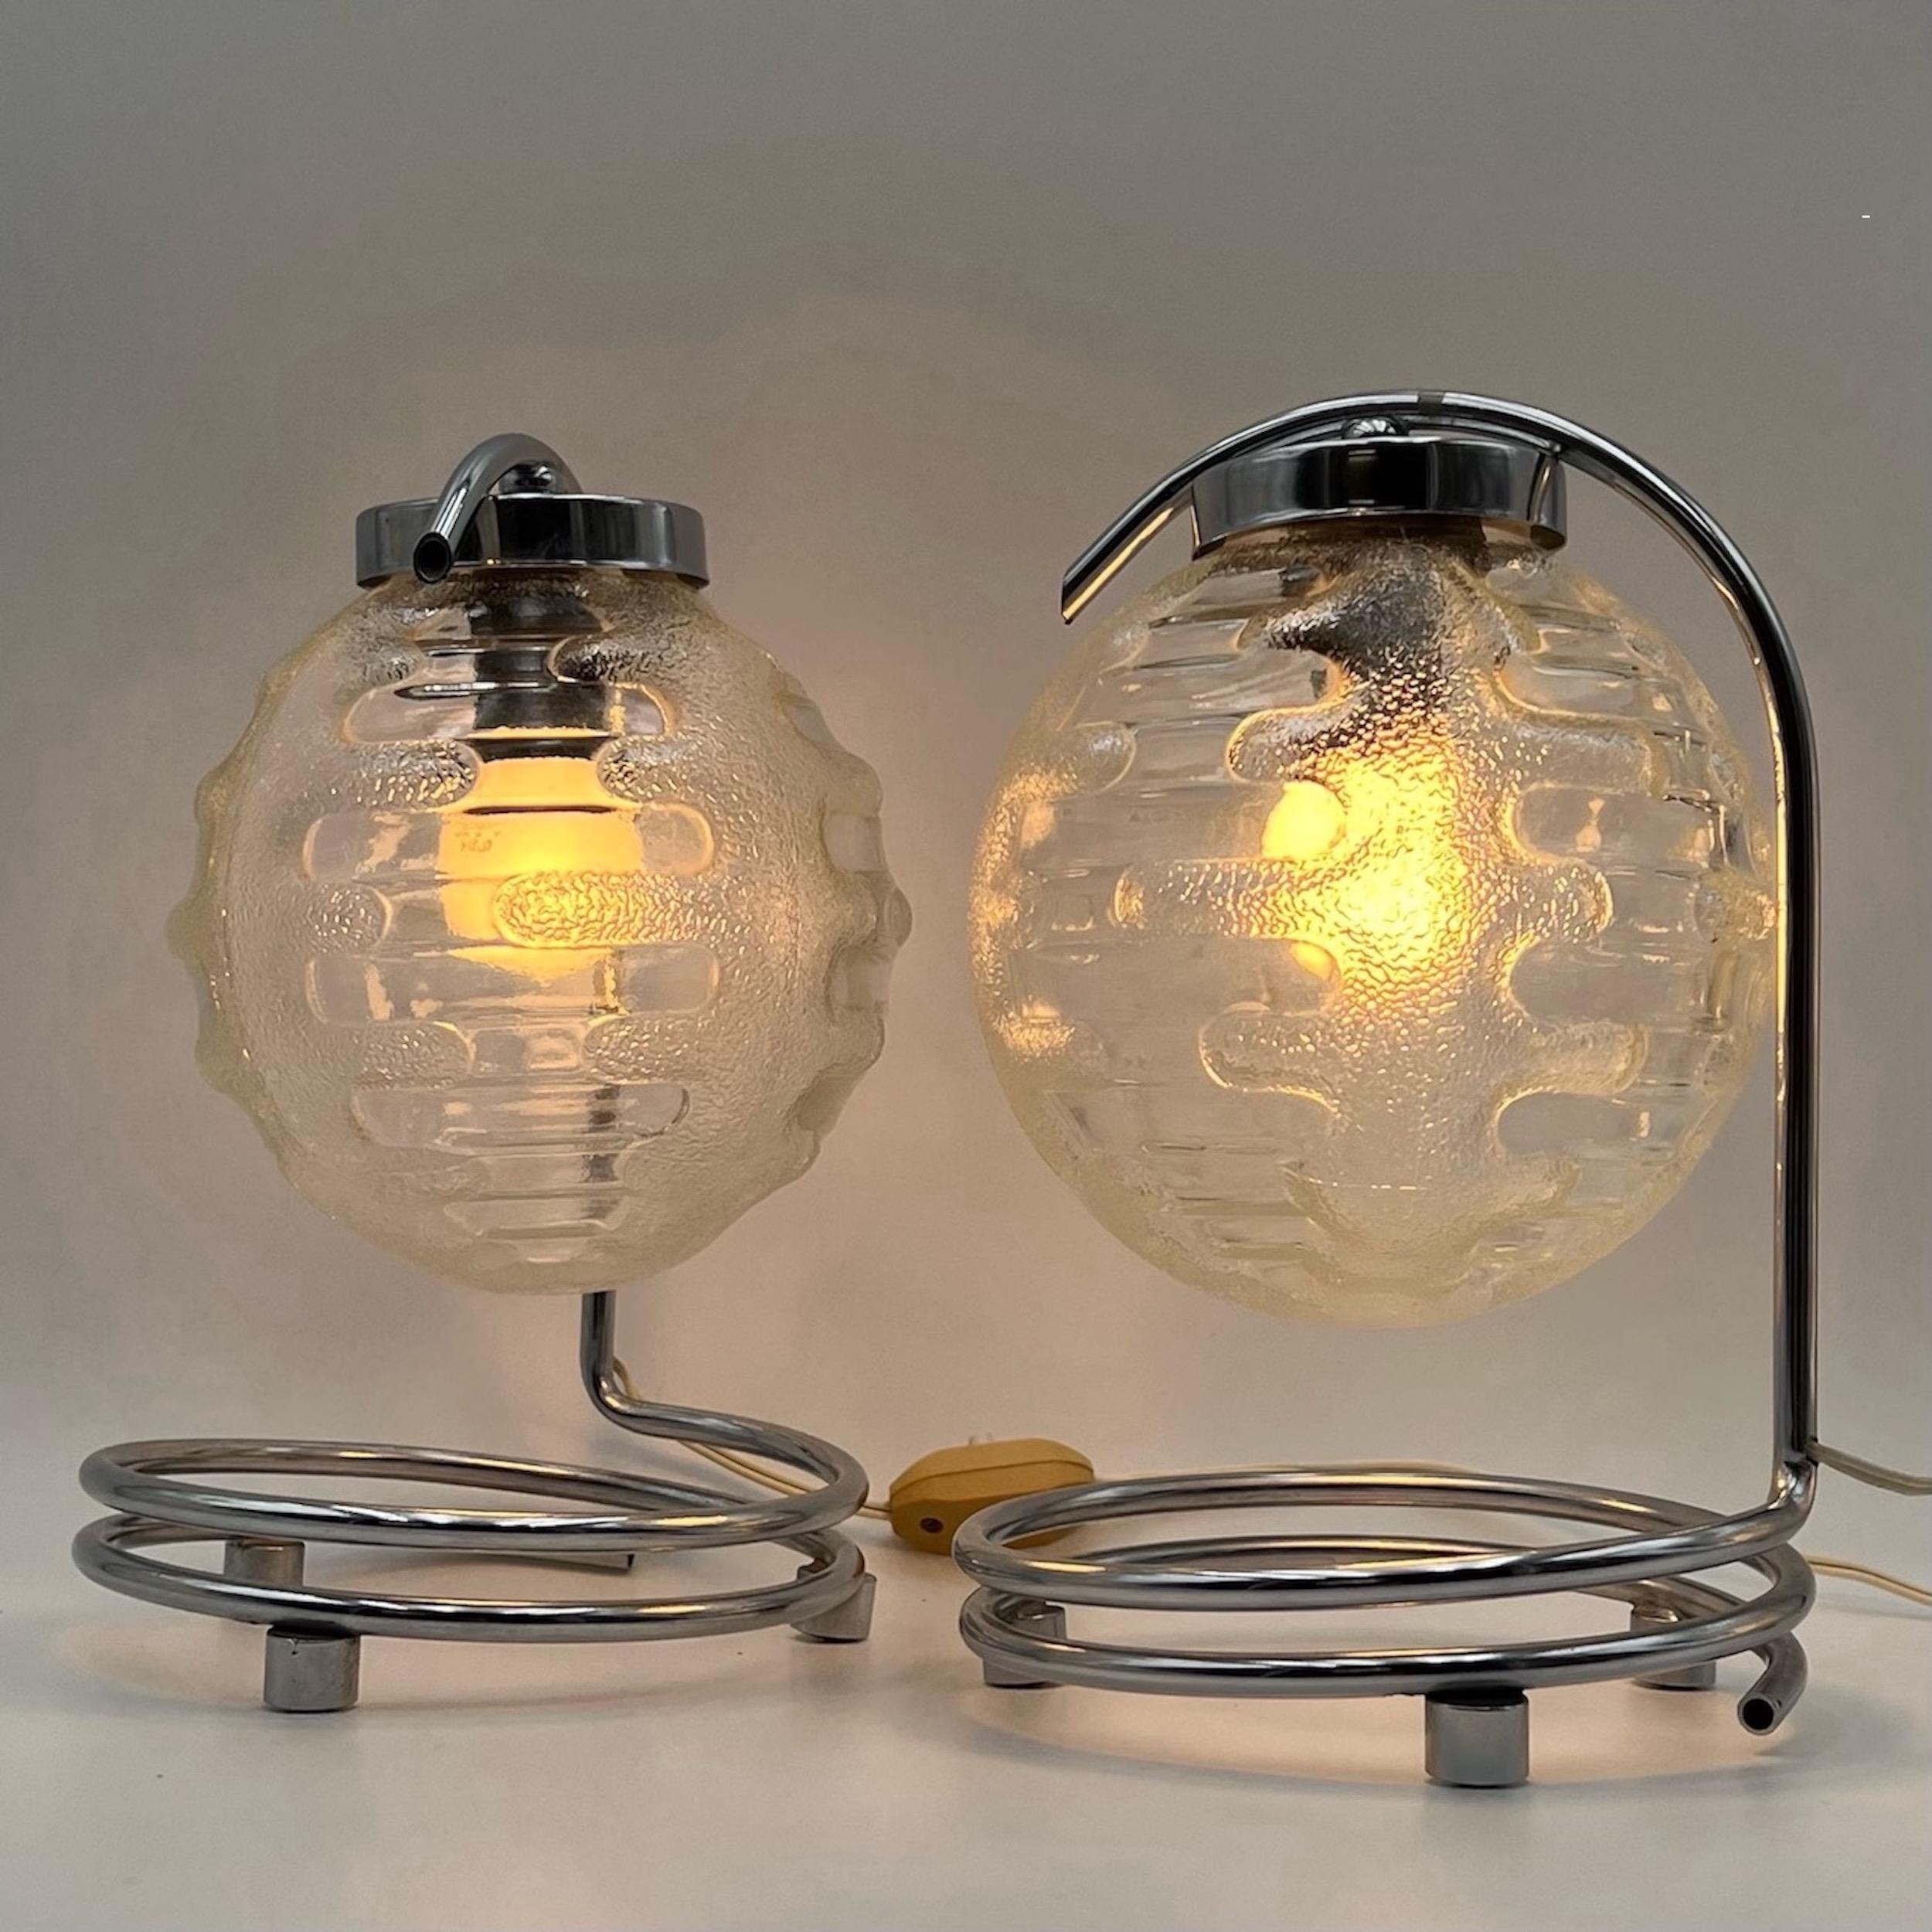 Chromed Lamps with Patterned Glass Globes by Richard Essig, 1970s, Set of 2 For Sale 4